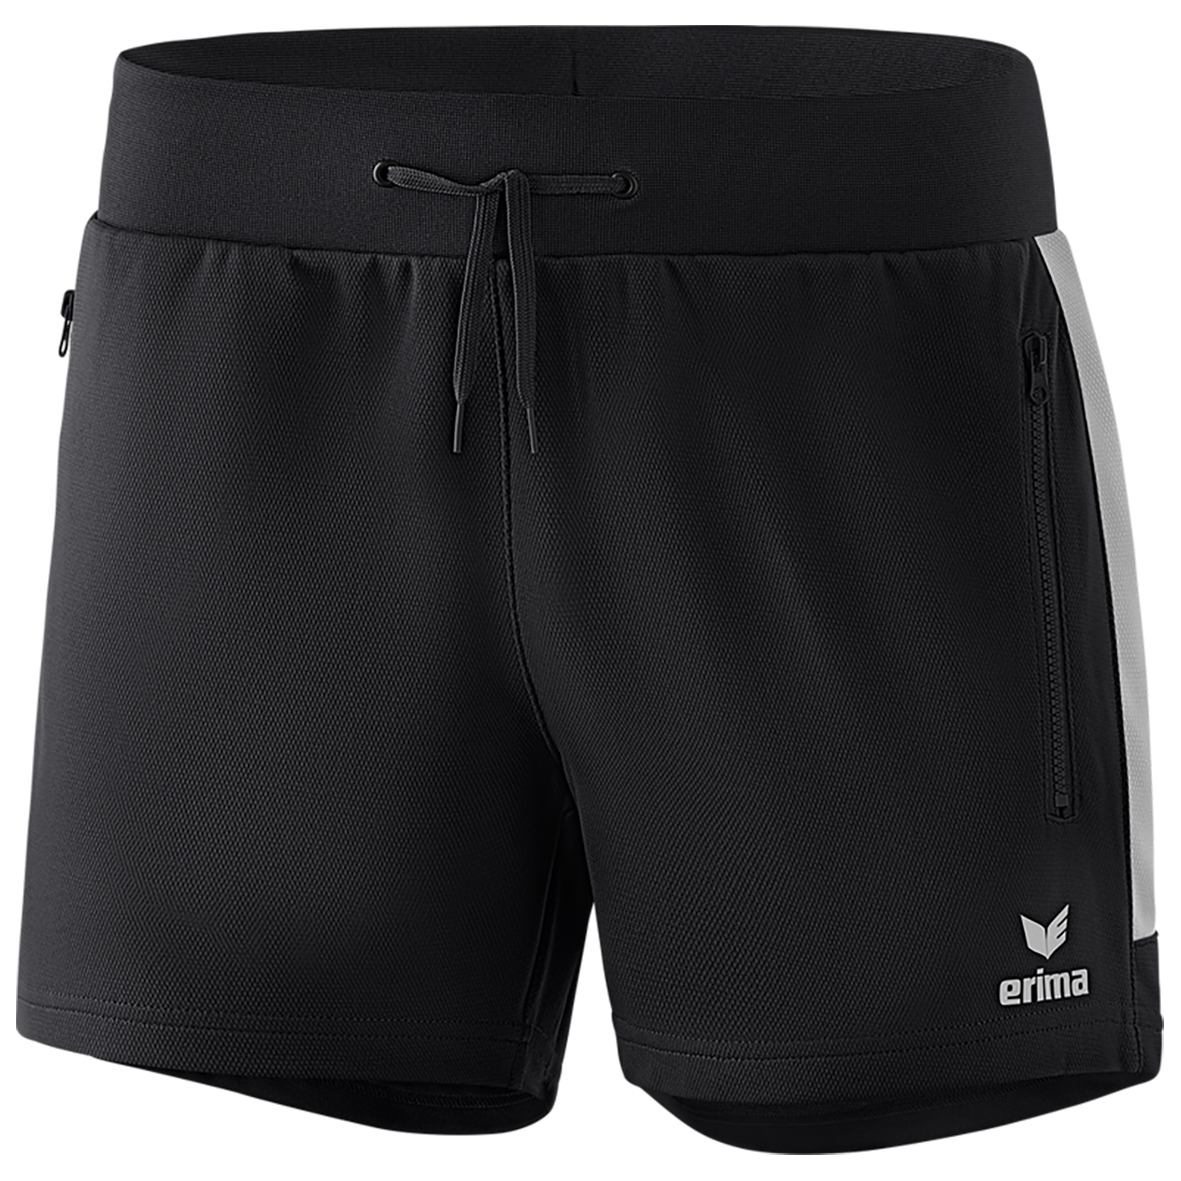 ERIMA SQUAD WORKER SHORTS, NEGRO-GRIS MUJER.